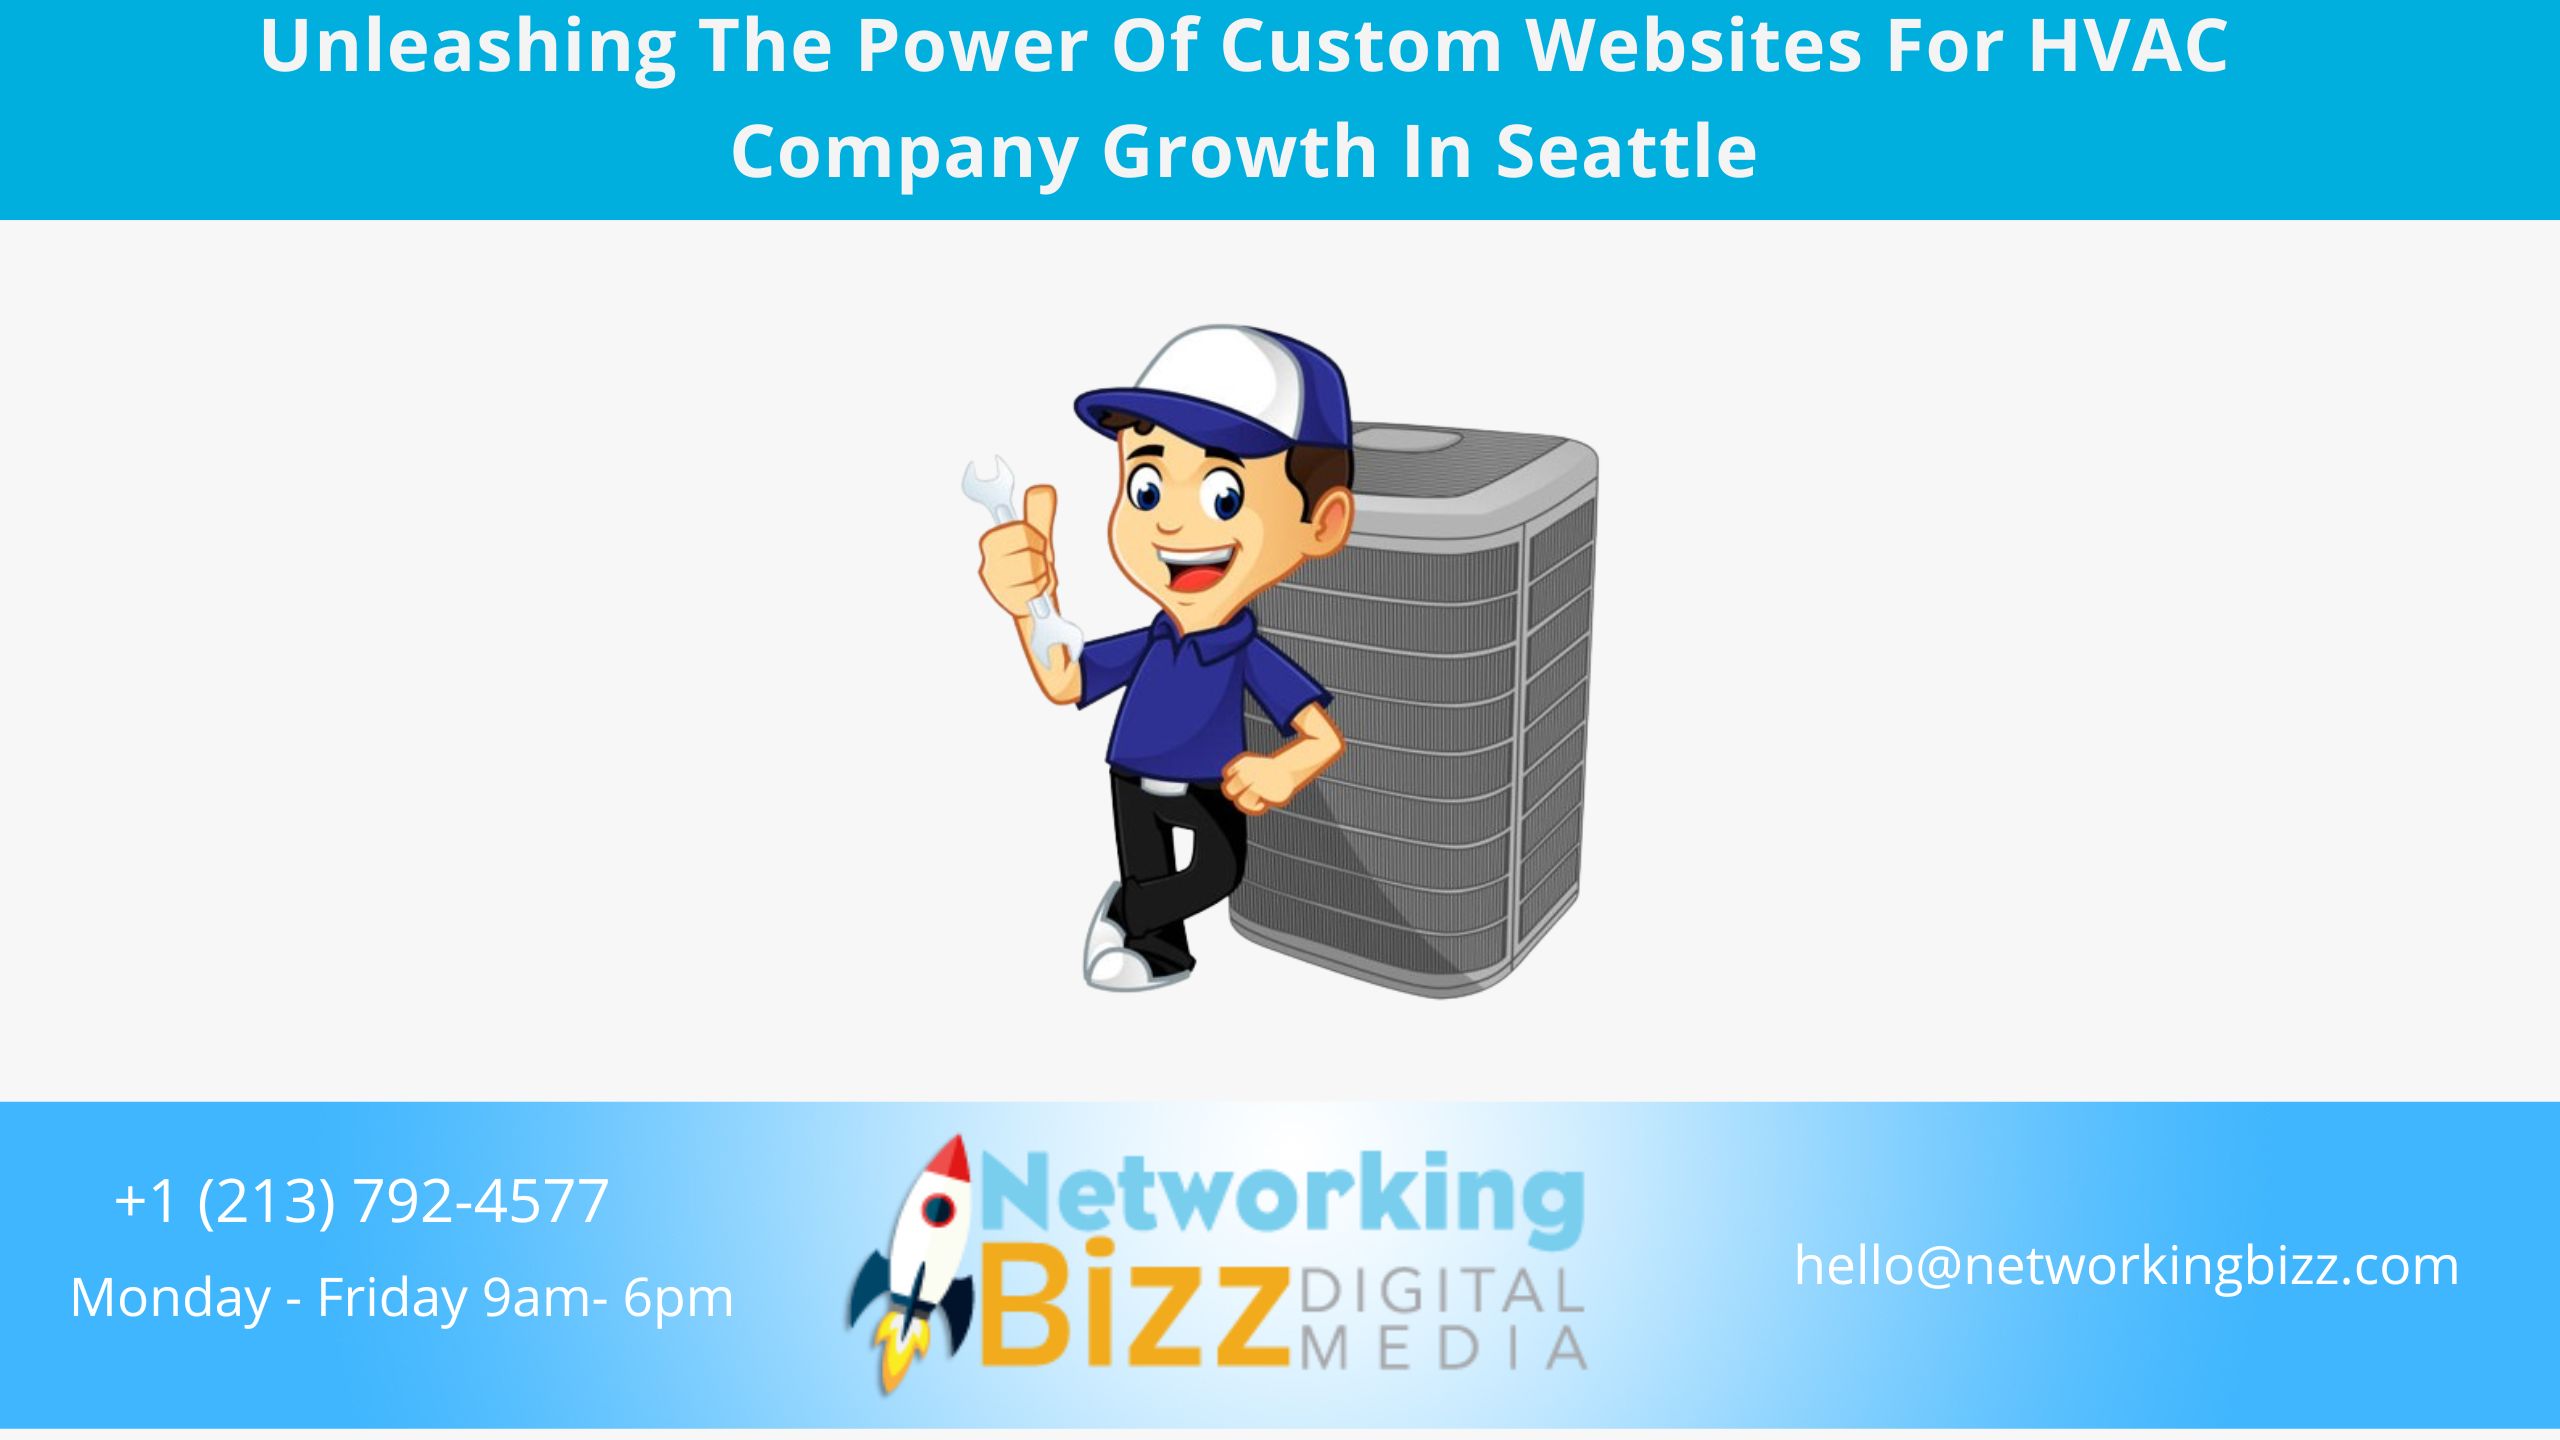 Unleashing The Power Of Custom Websites For HVAC Company Growth In Seattle  